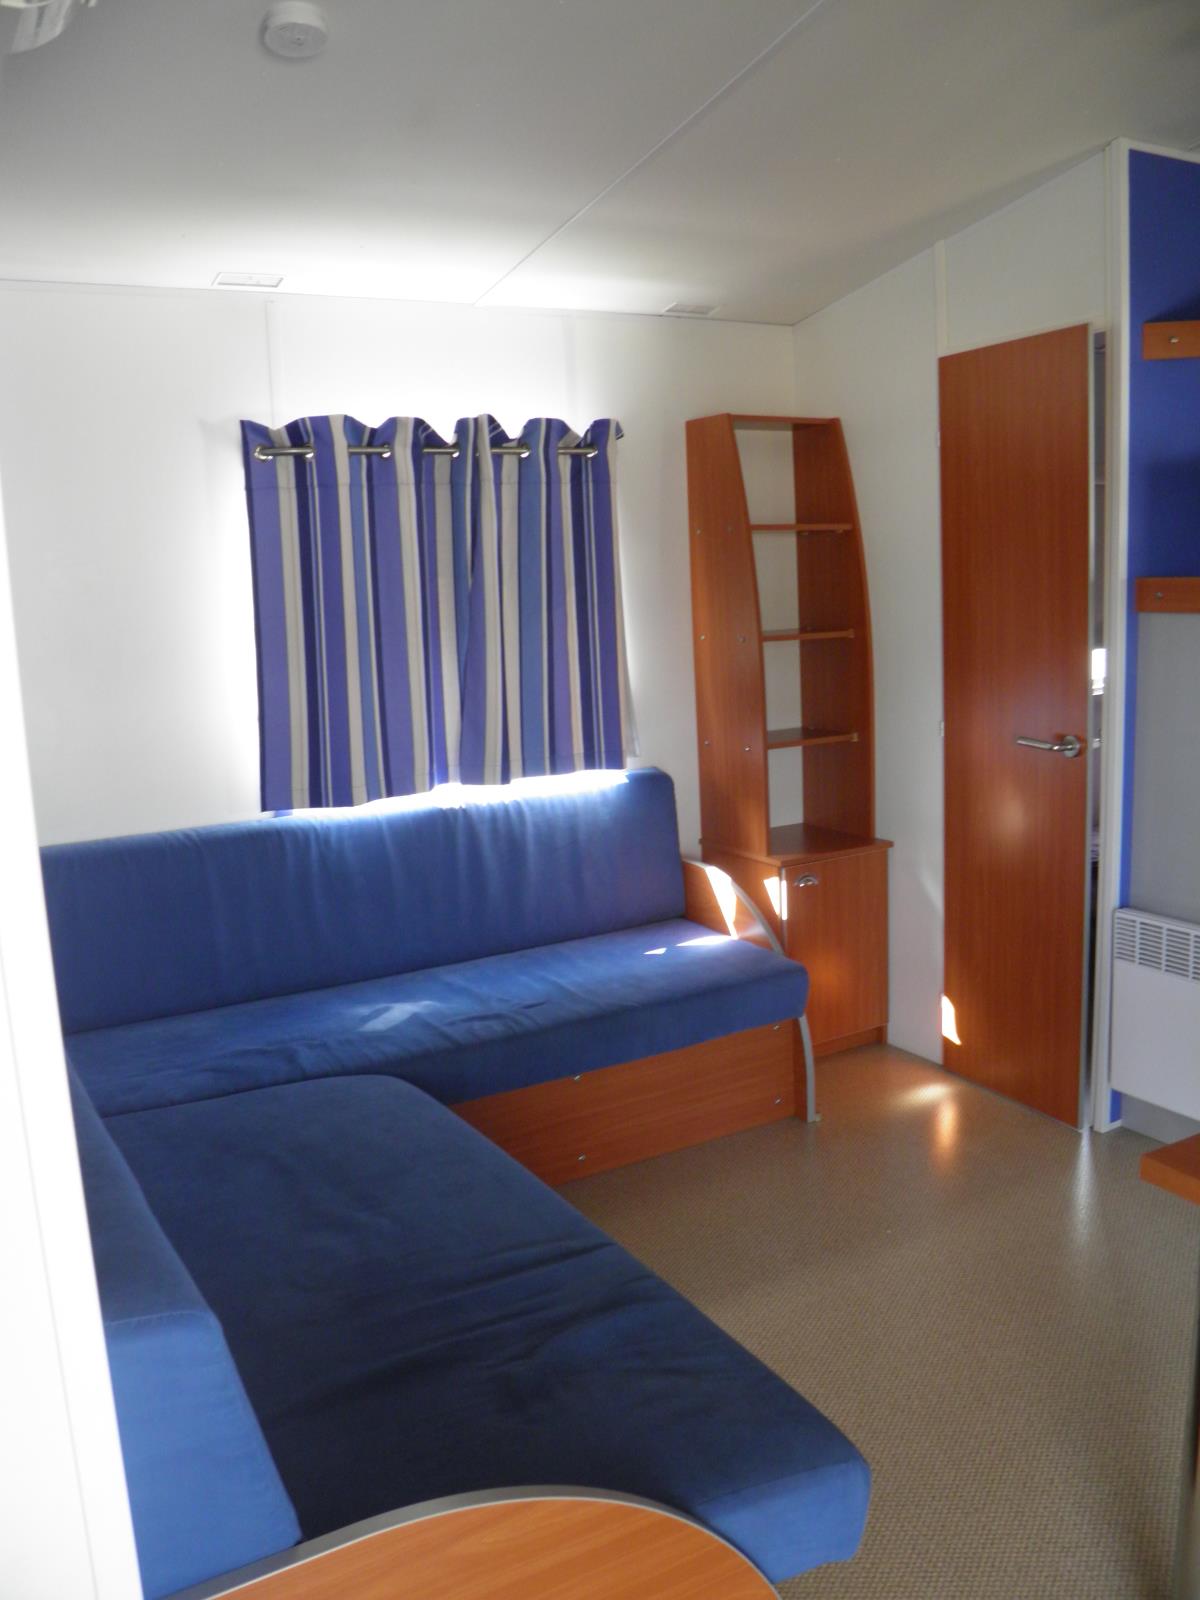 Accommodation - Ib Mobile Home Loft Rapidhome 30M² + Air-Conditioning 2 Bedrooms - Camping Le Sous-Bois